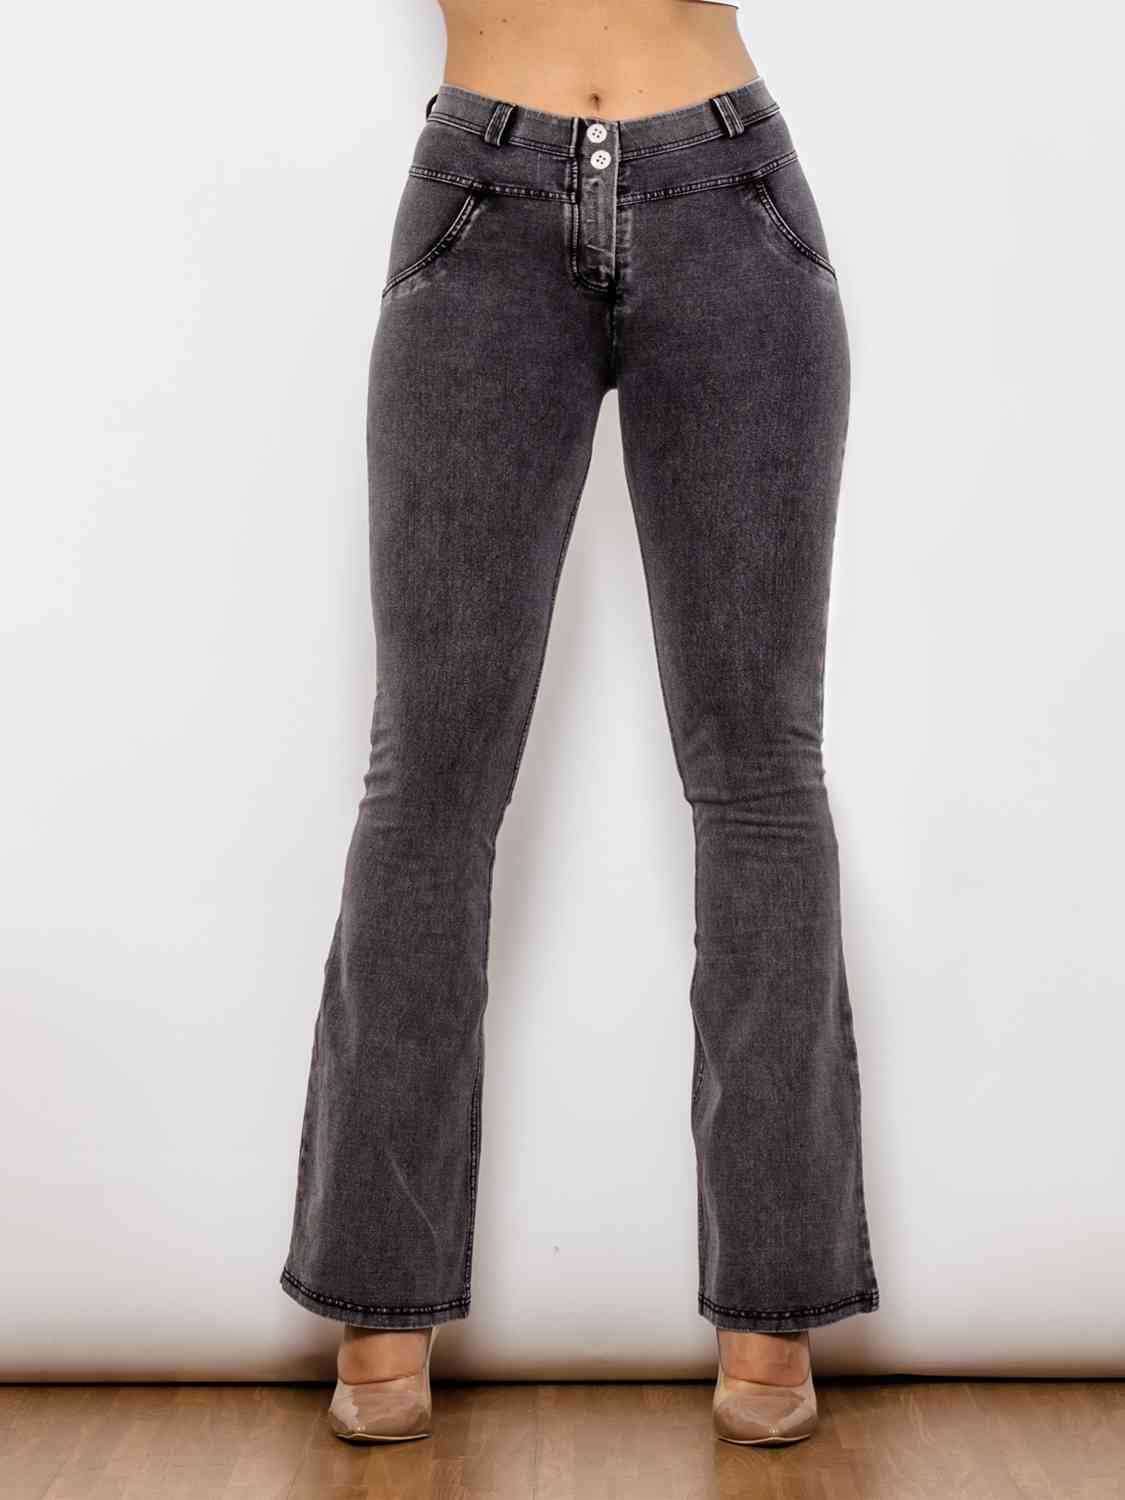 swvws Full Size Long Bootcut Jeans